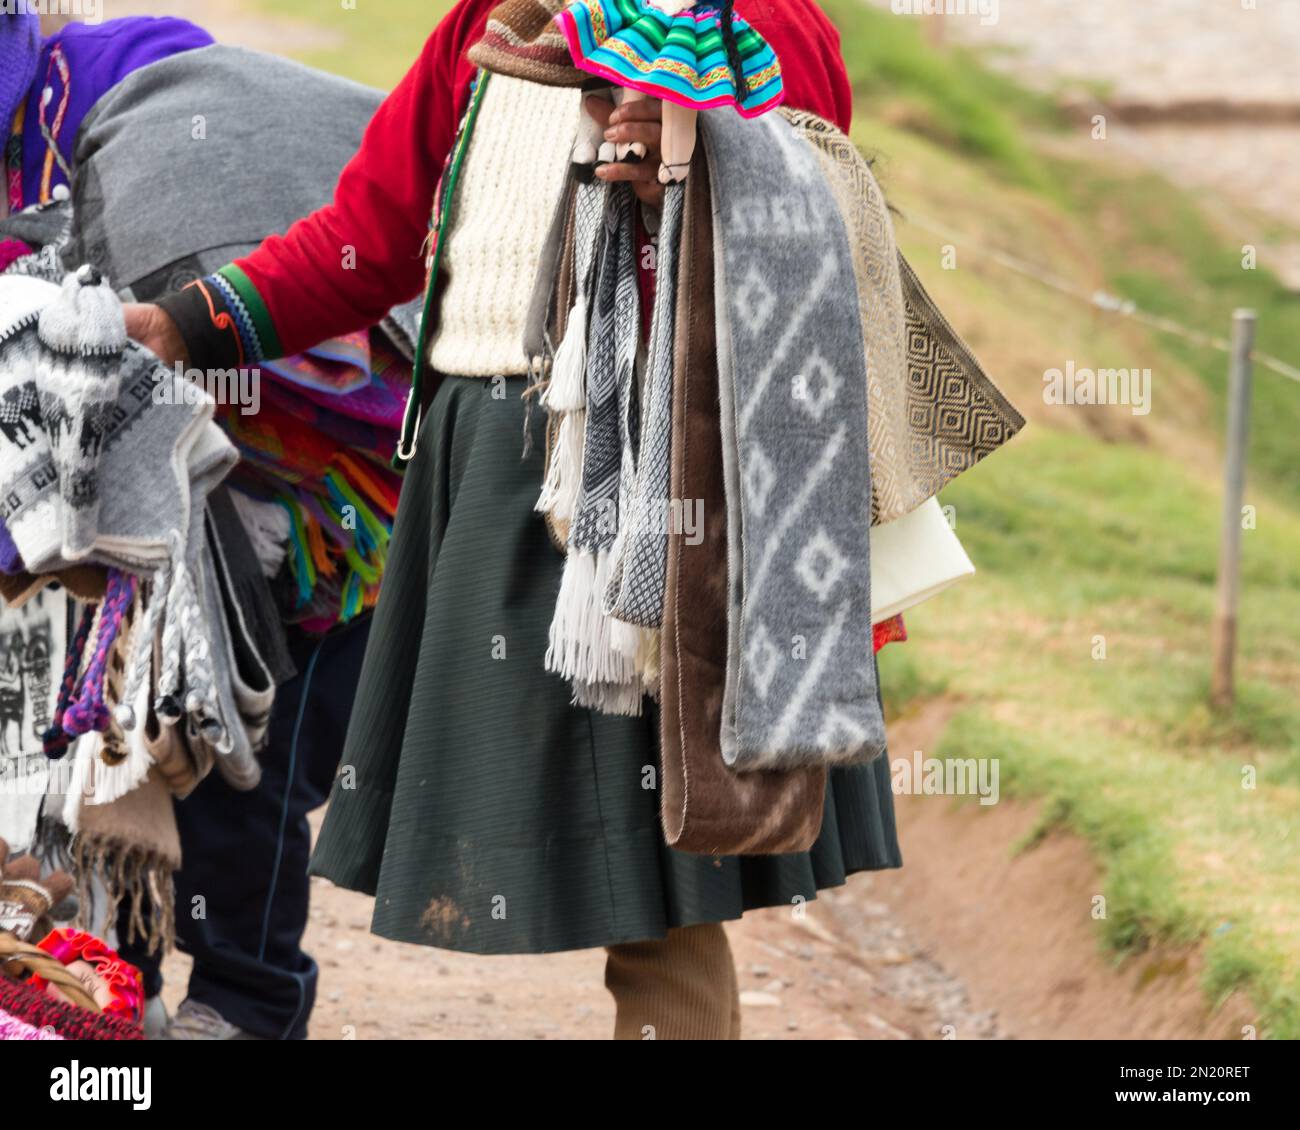 Scarves and other hand-woven alpaca wool clothing sold by a street vendor Stock Photo